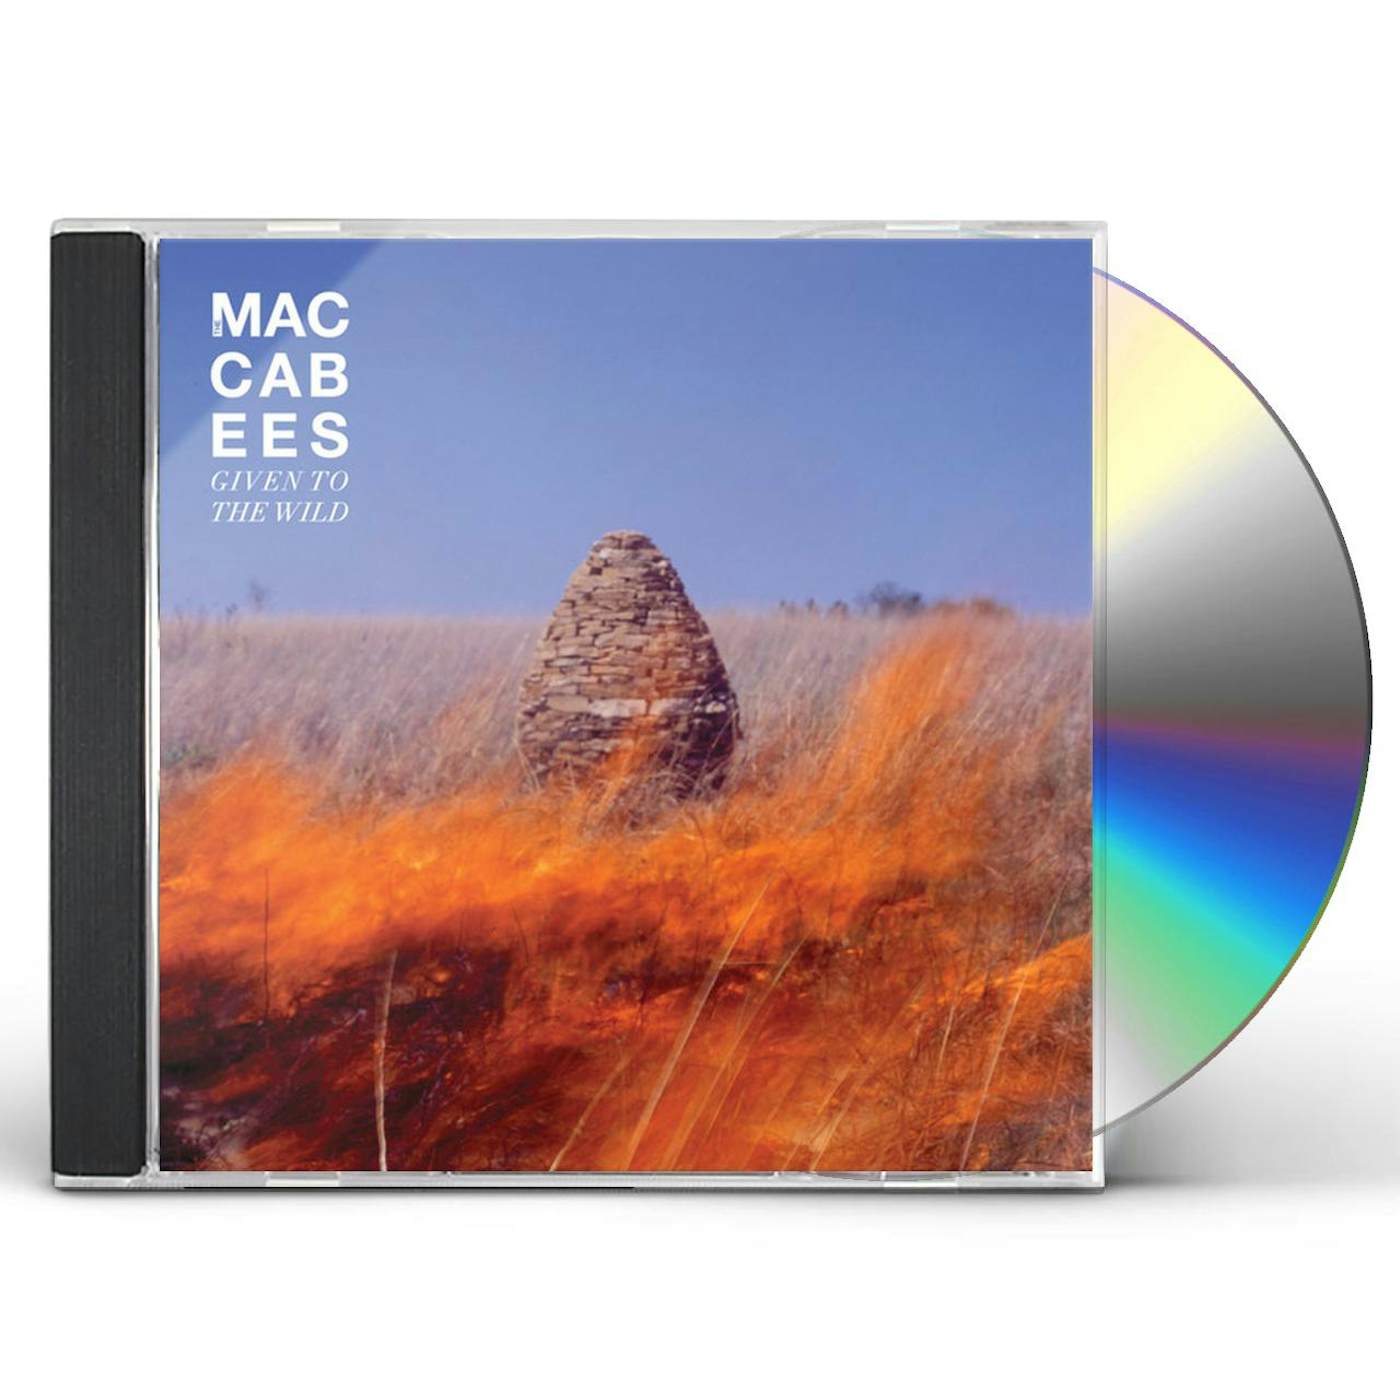 Maccabees GIVEN TO THE WILD CD